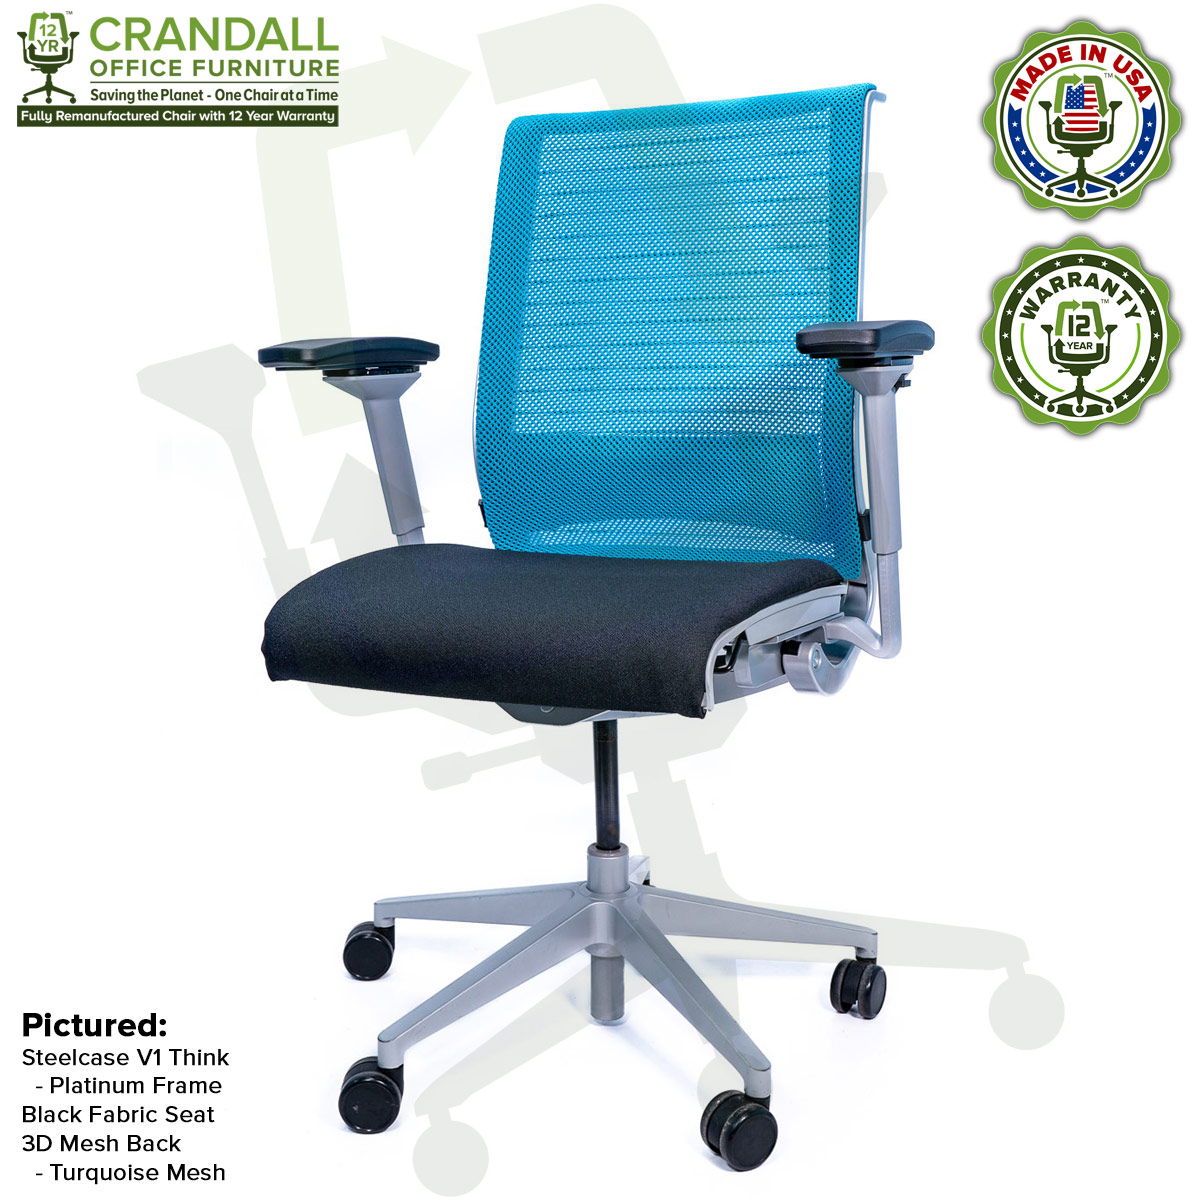 Crandall Office Furniture Remanufactured Steelcase Think Chair with 12 Year Warranty - Platinum Frame - Turquoise Mesh